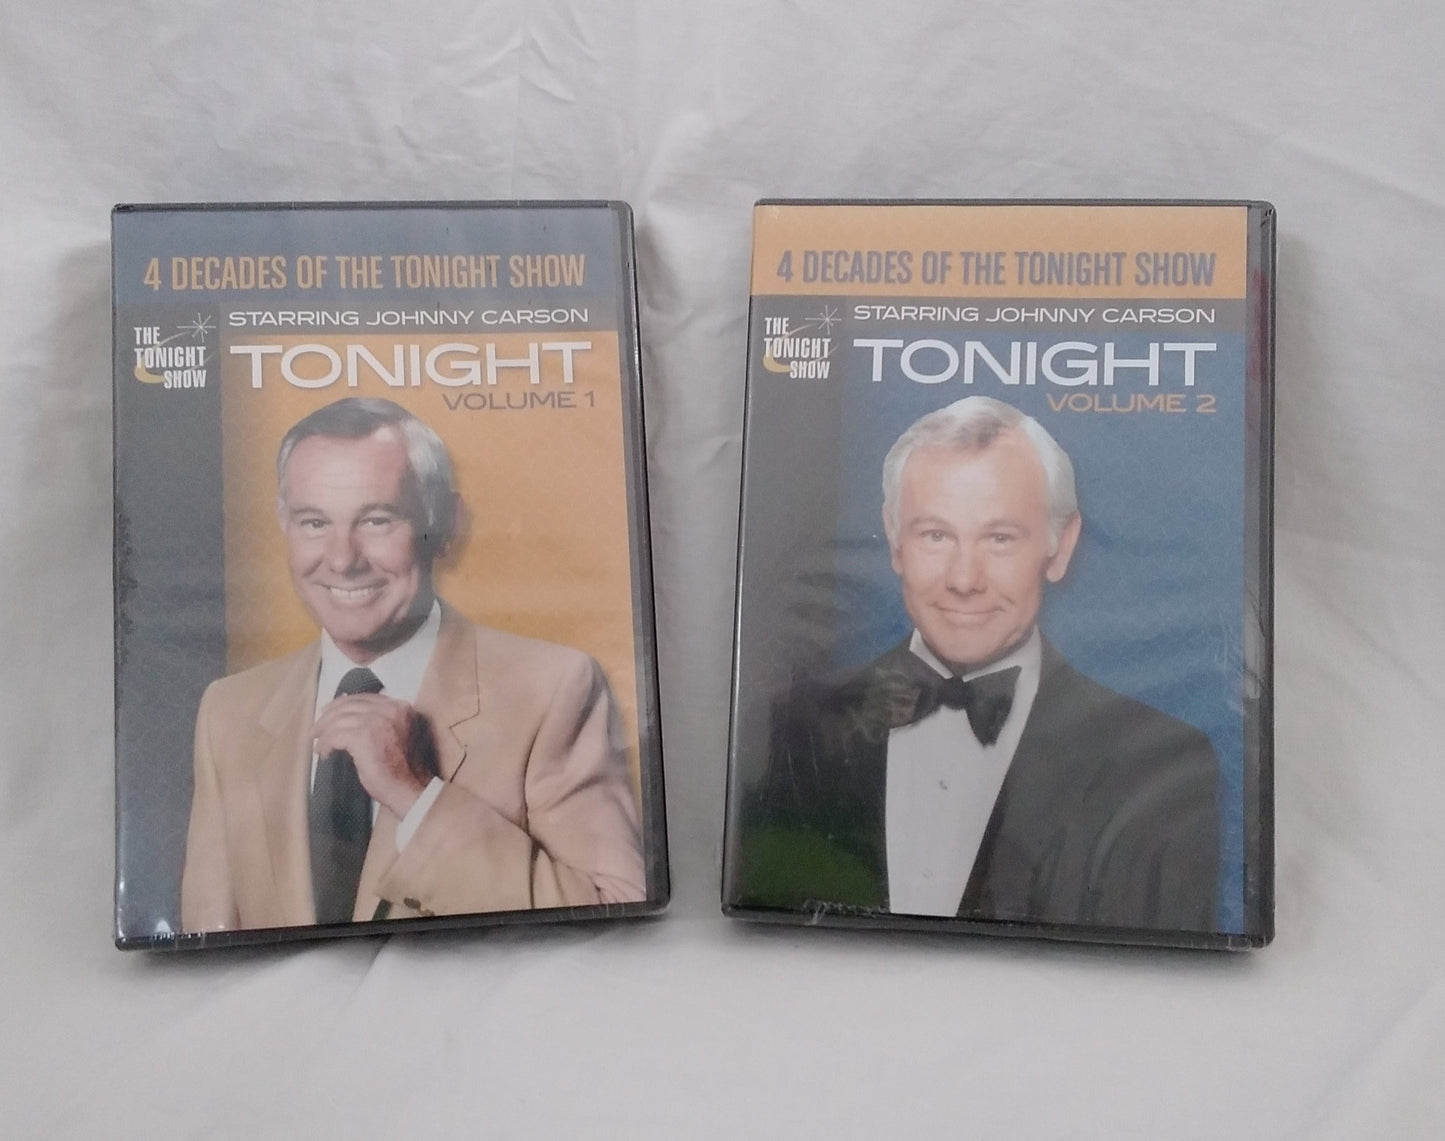 New and Sealed! -- 4 Decades of the Tonight Show with Johnny Carson -- 15 DVD Box Set